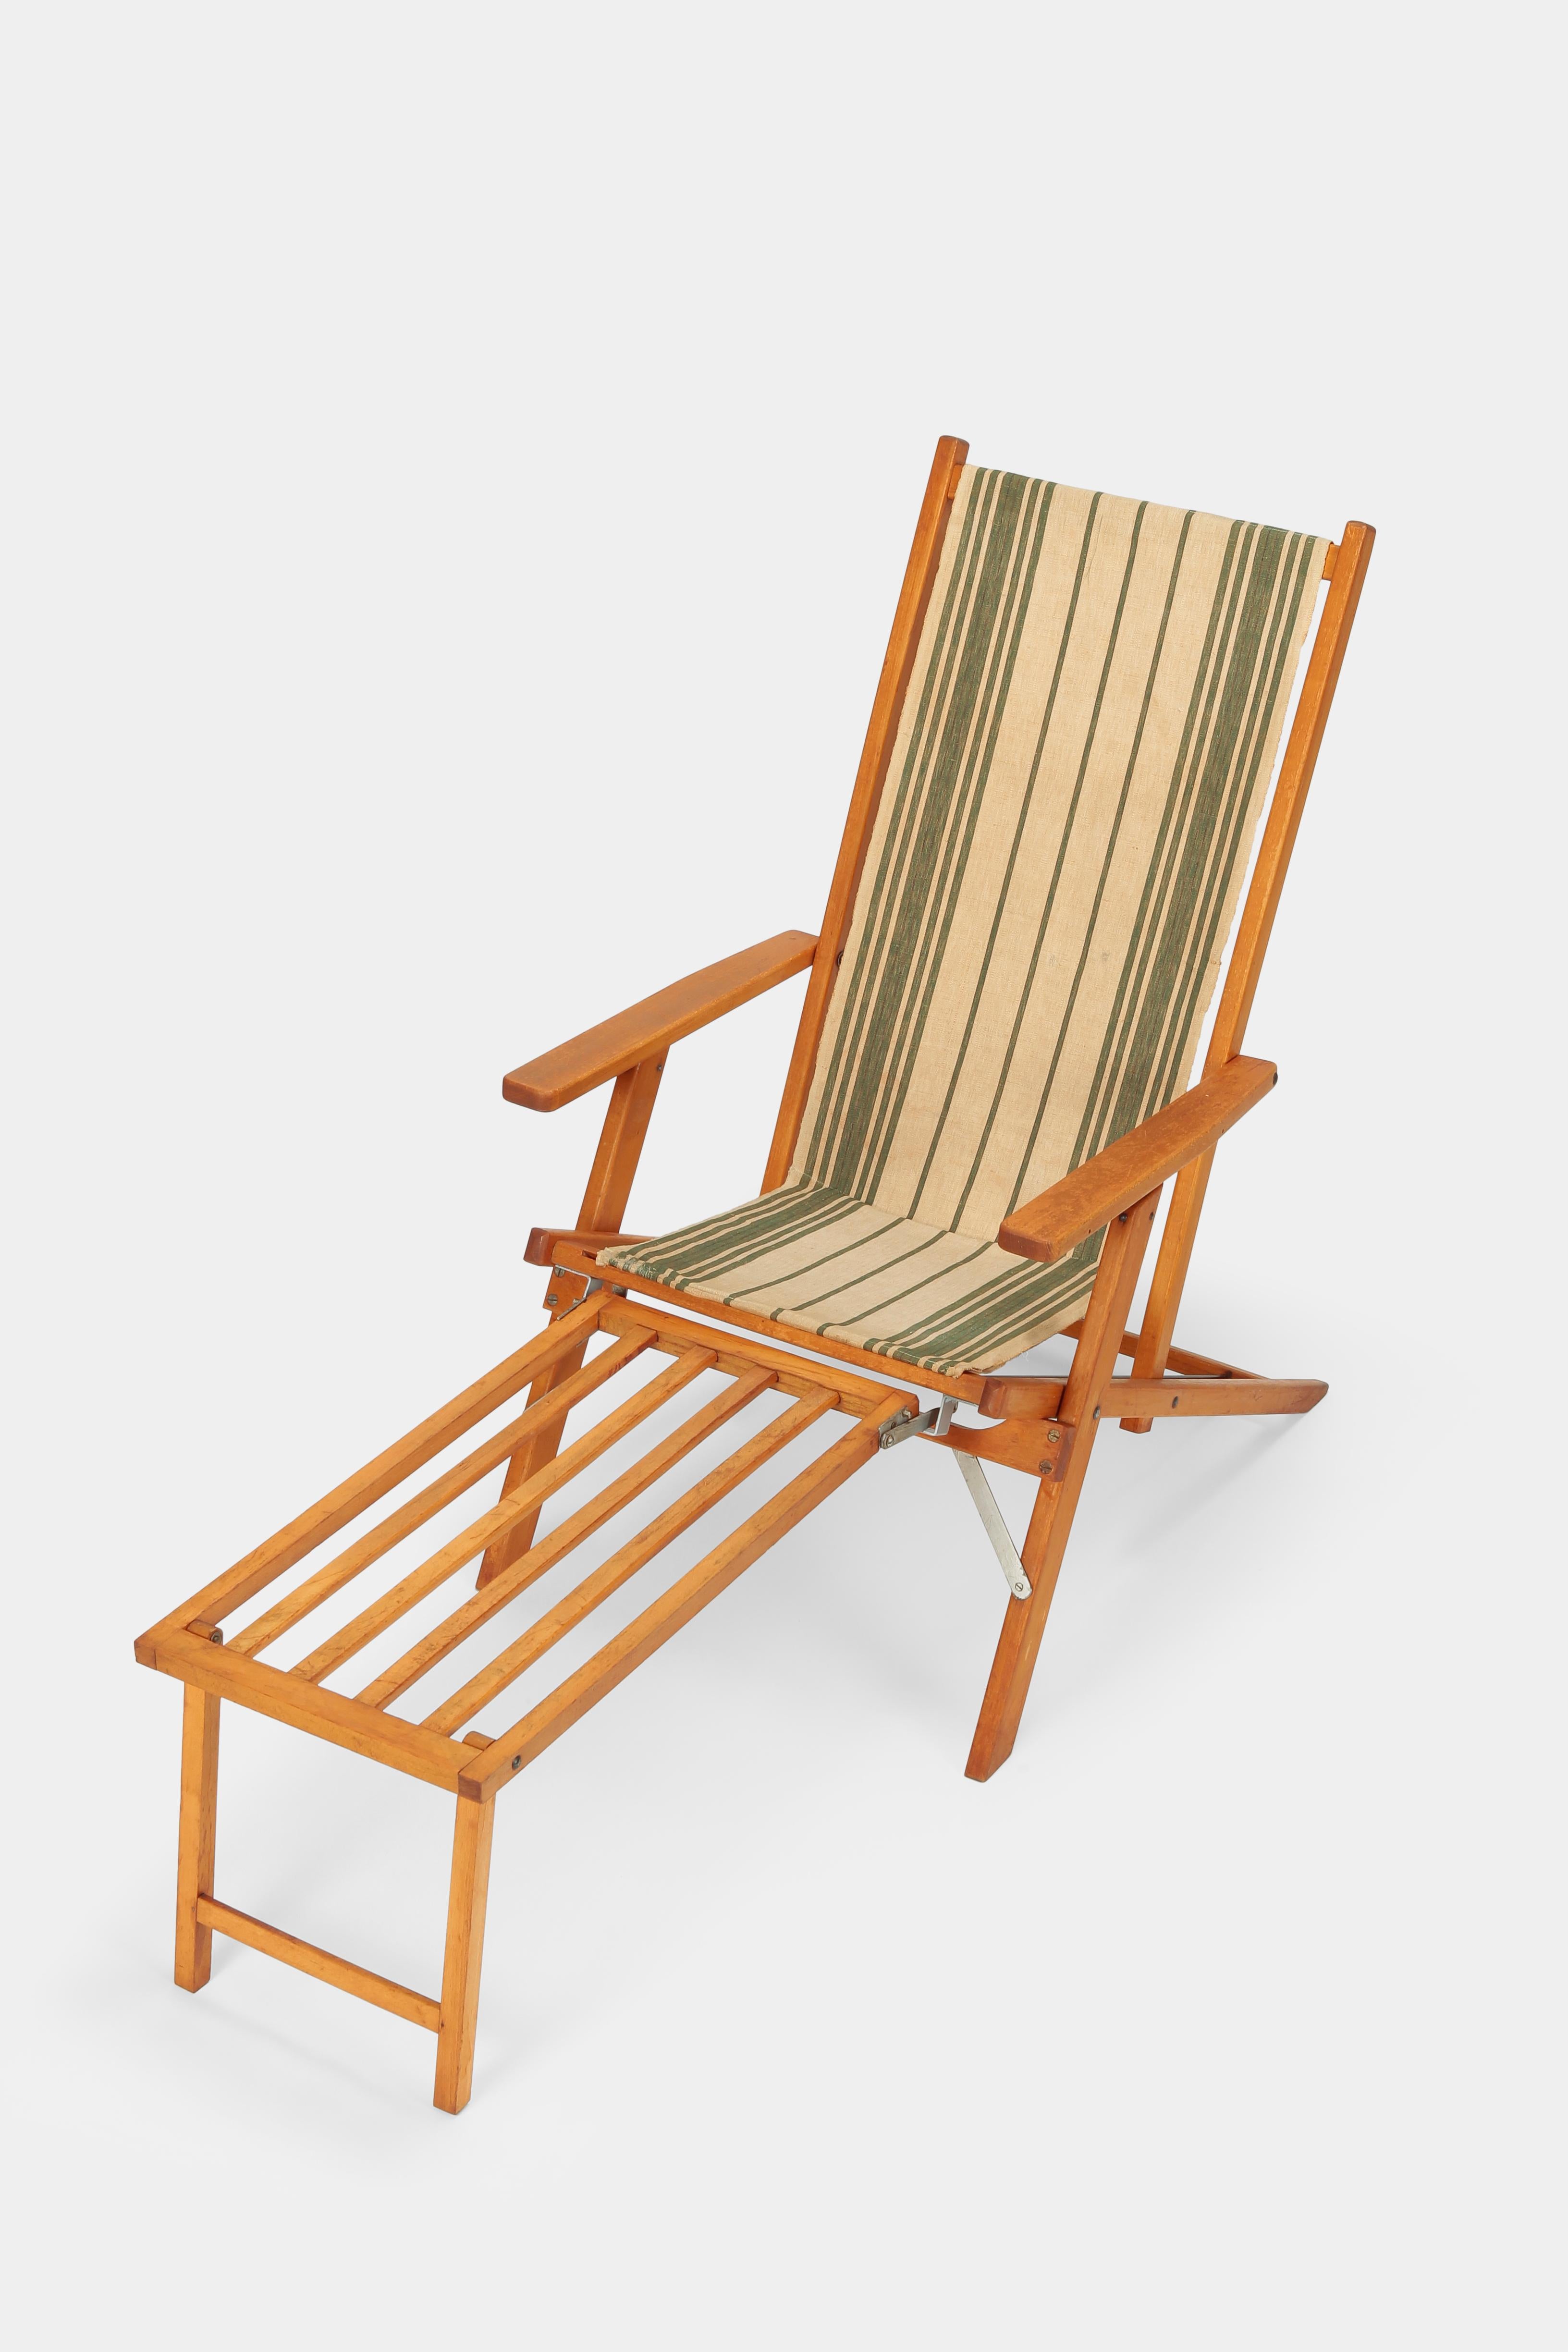 Fritz Fahrner folding chair manufactured in the 1930s in Switzerland. Very rare folding chair made of beech wood and linen. The armchair has a special folding mechanism and can therefore be adjusted in various positions and even serves as a